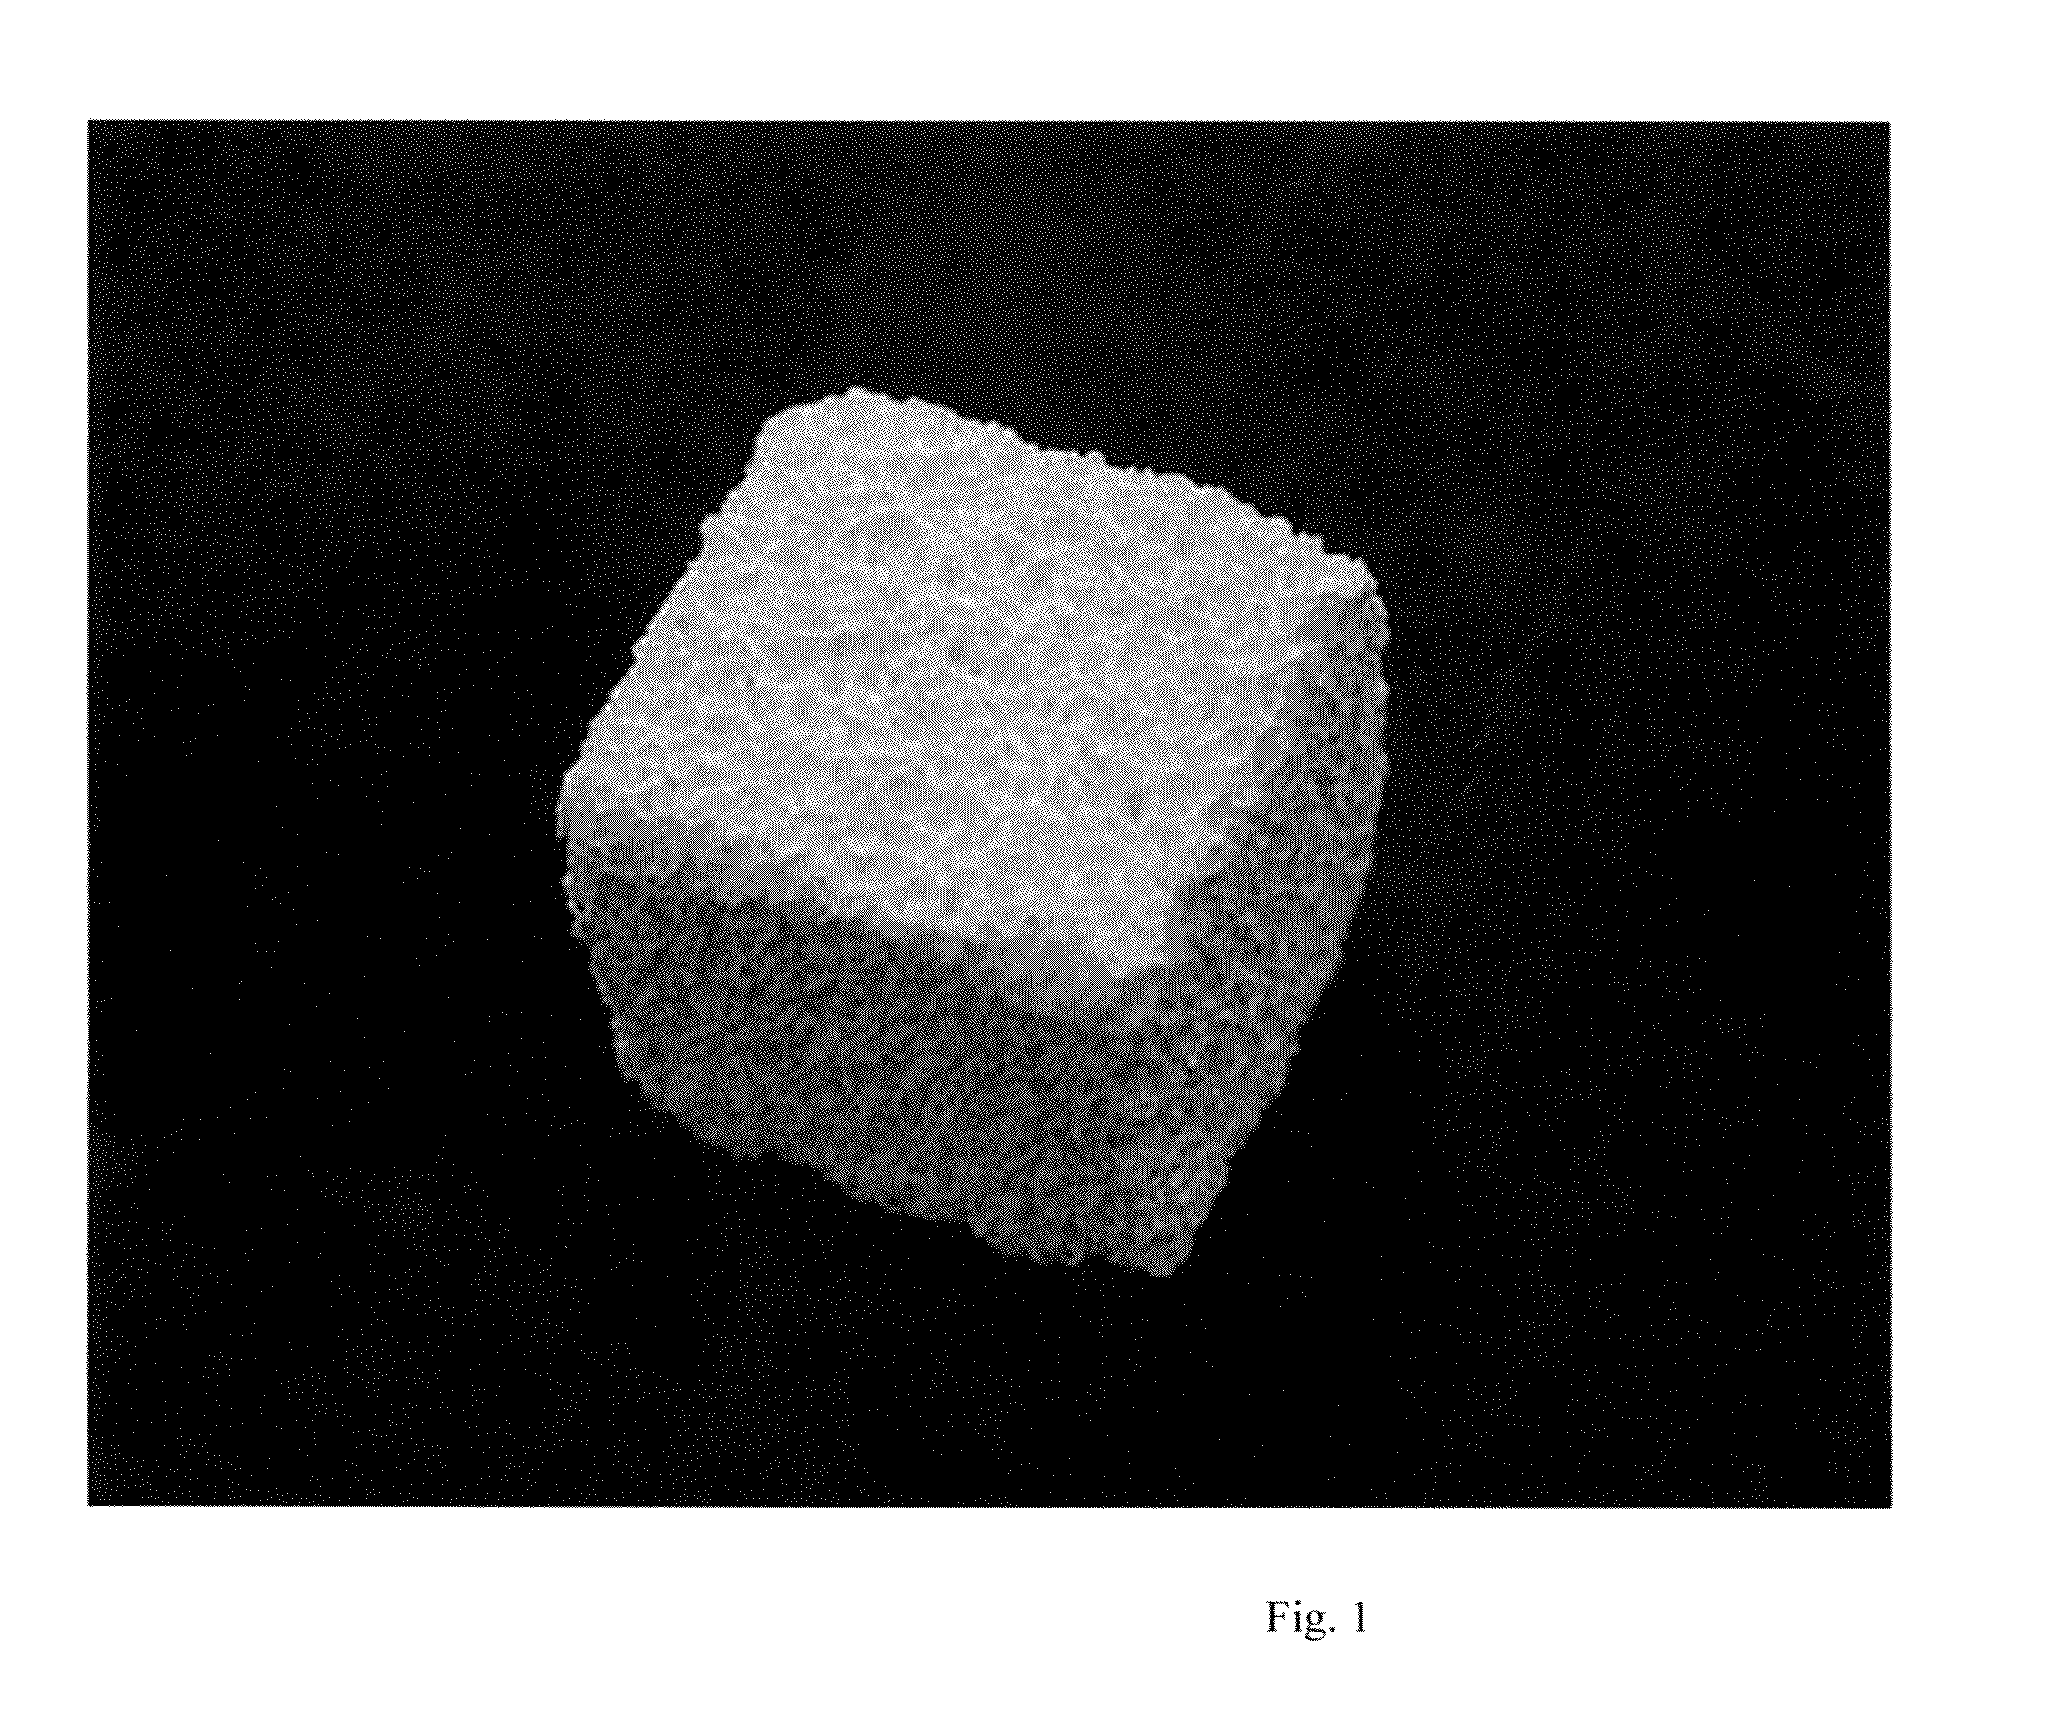 Porous composite comprising silicon-substituted hydroxyapatite and ß- tricalcium phosphate, and process for preparing the same